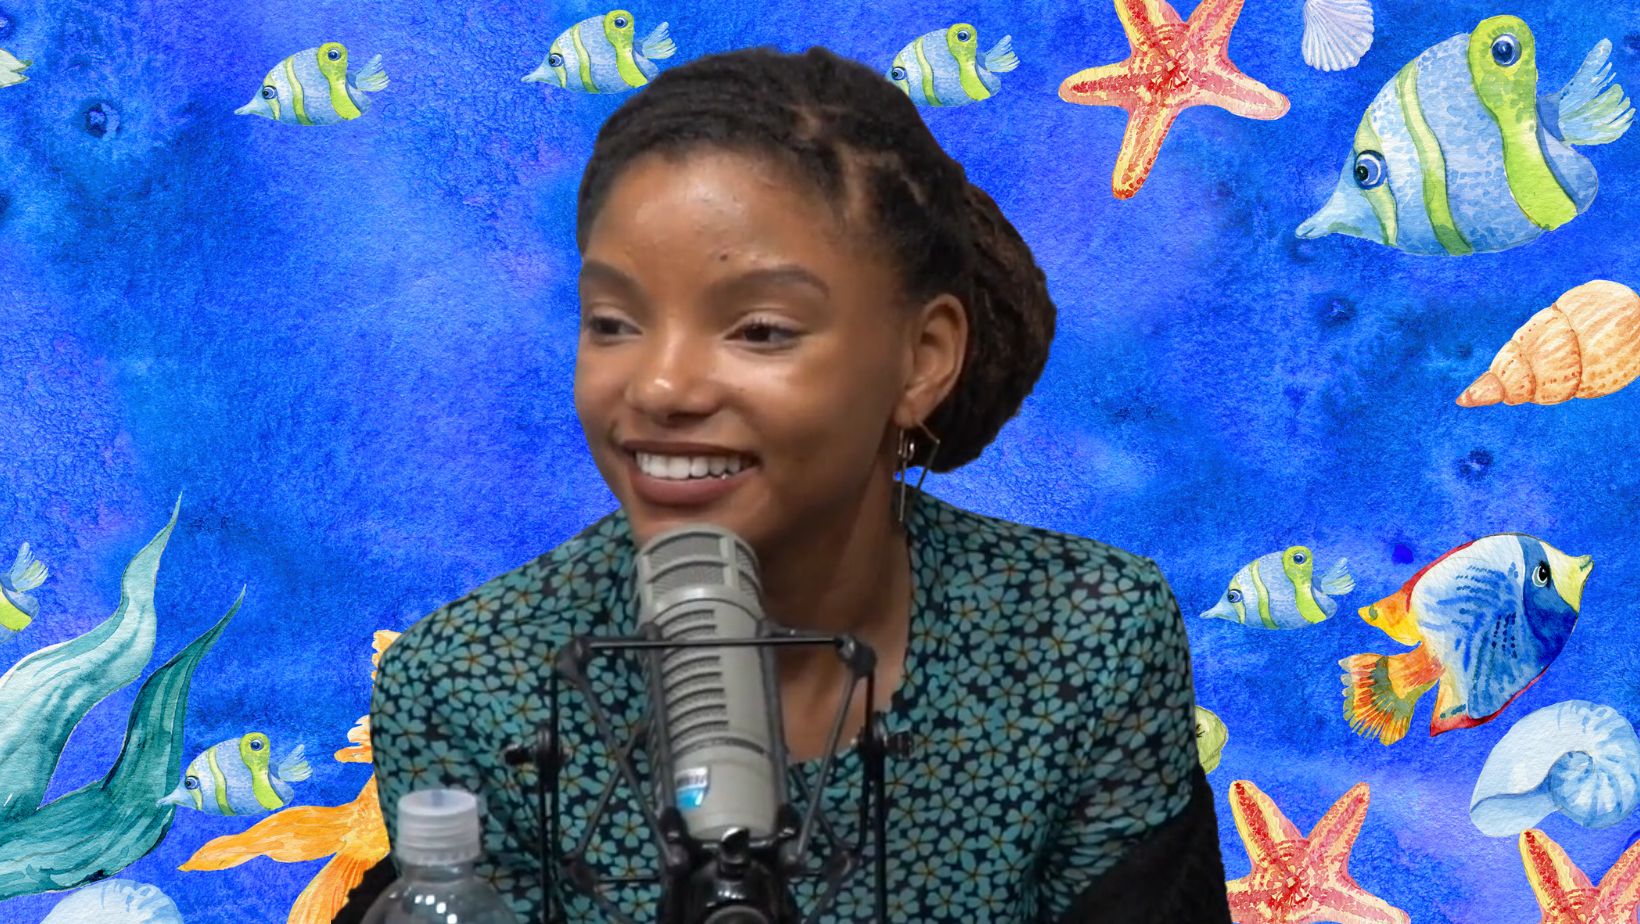 Microaggressions and Tasteless Comments, This is What Halle Bailey Endured During Her Interview About ‘The Little Mermaid’ with Patricio Borghetti in Mexico